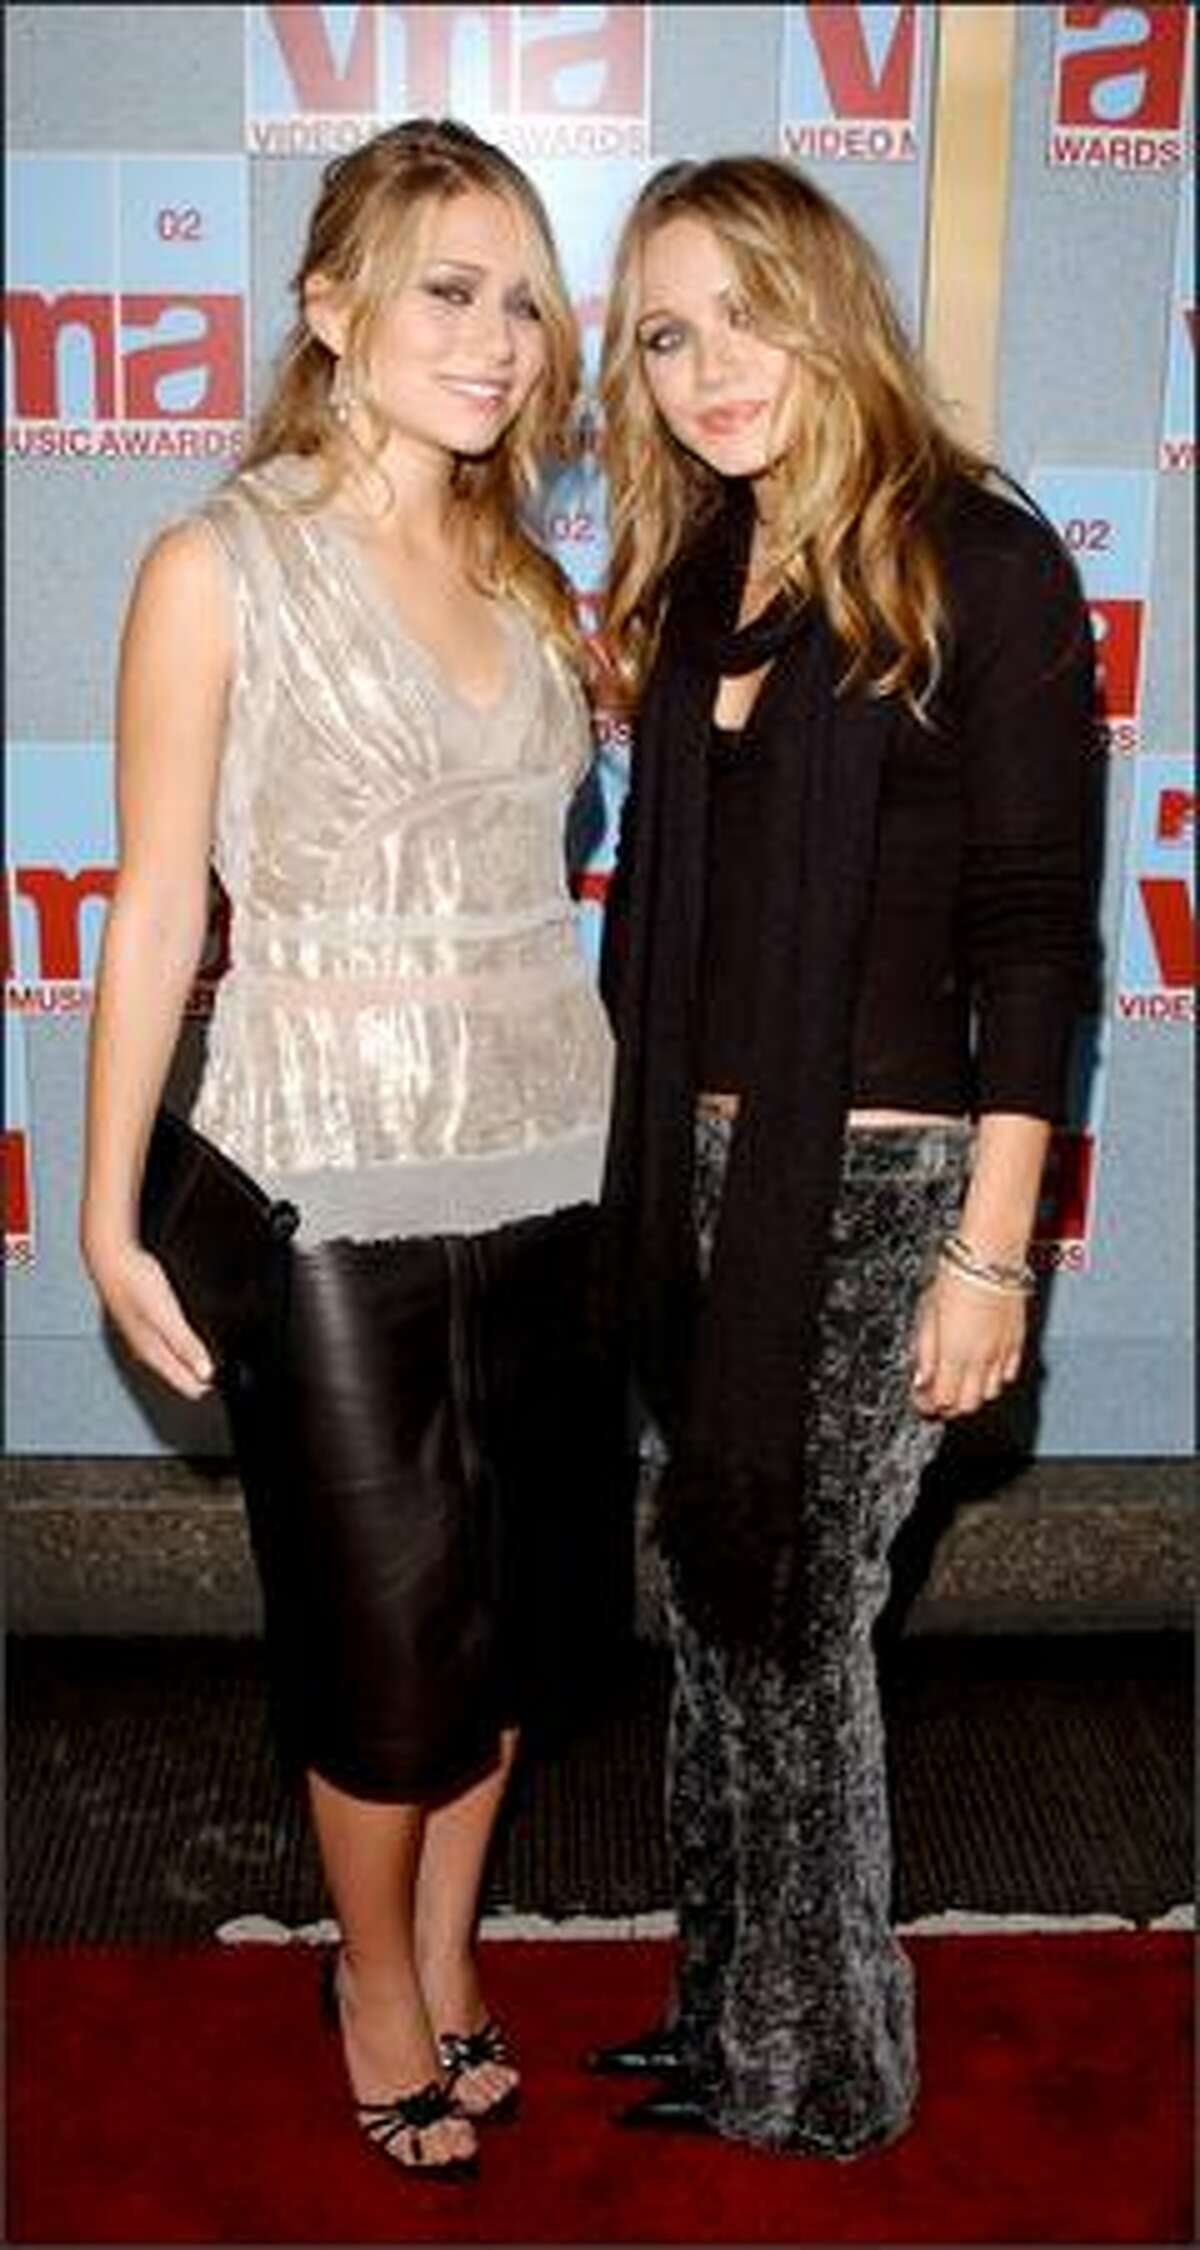 Ashley (left) and Mary-Kate arrive at the 2002 MTV Video Music Awards in New York, Aug. 29, 2002.